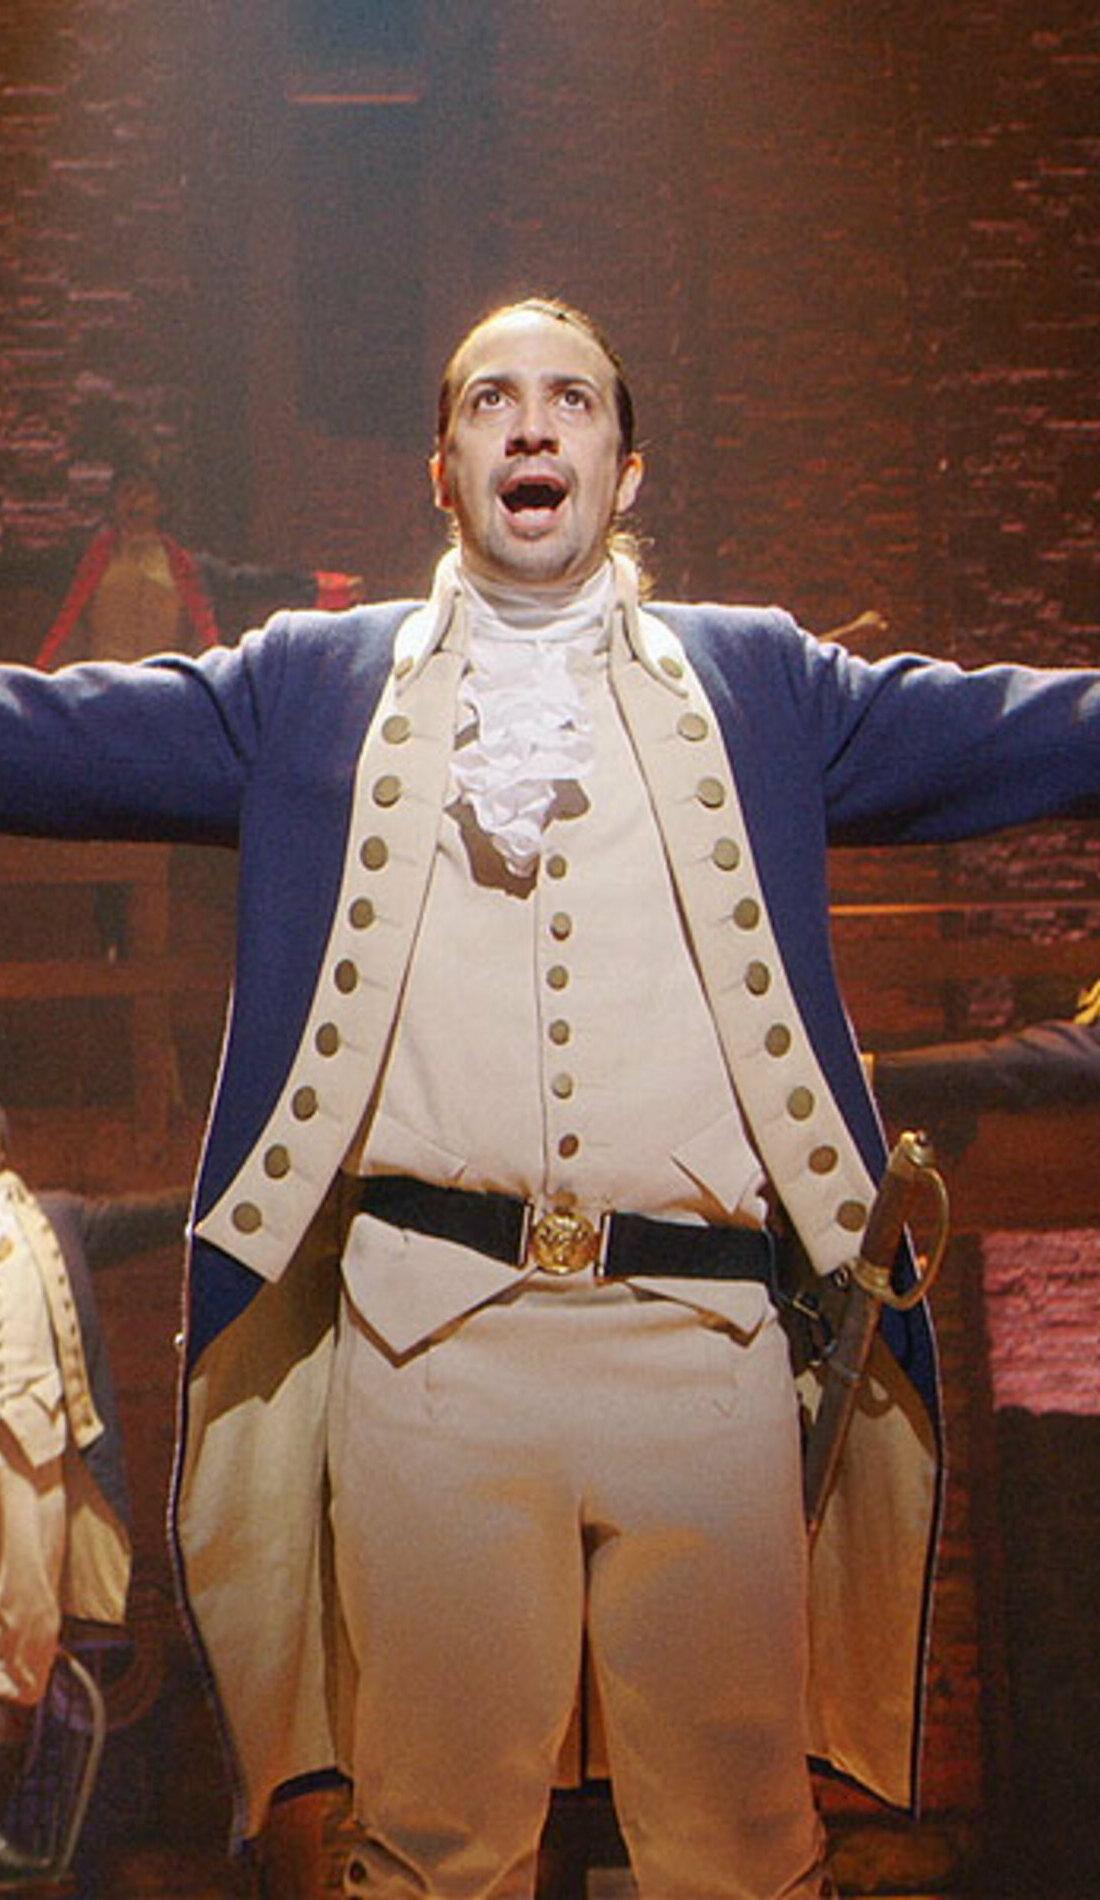 Hamilton' the musical will be performed Oct. 4-23 in Columbus